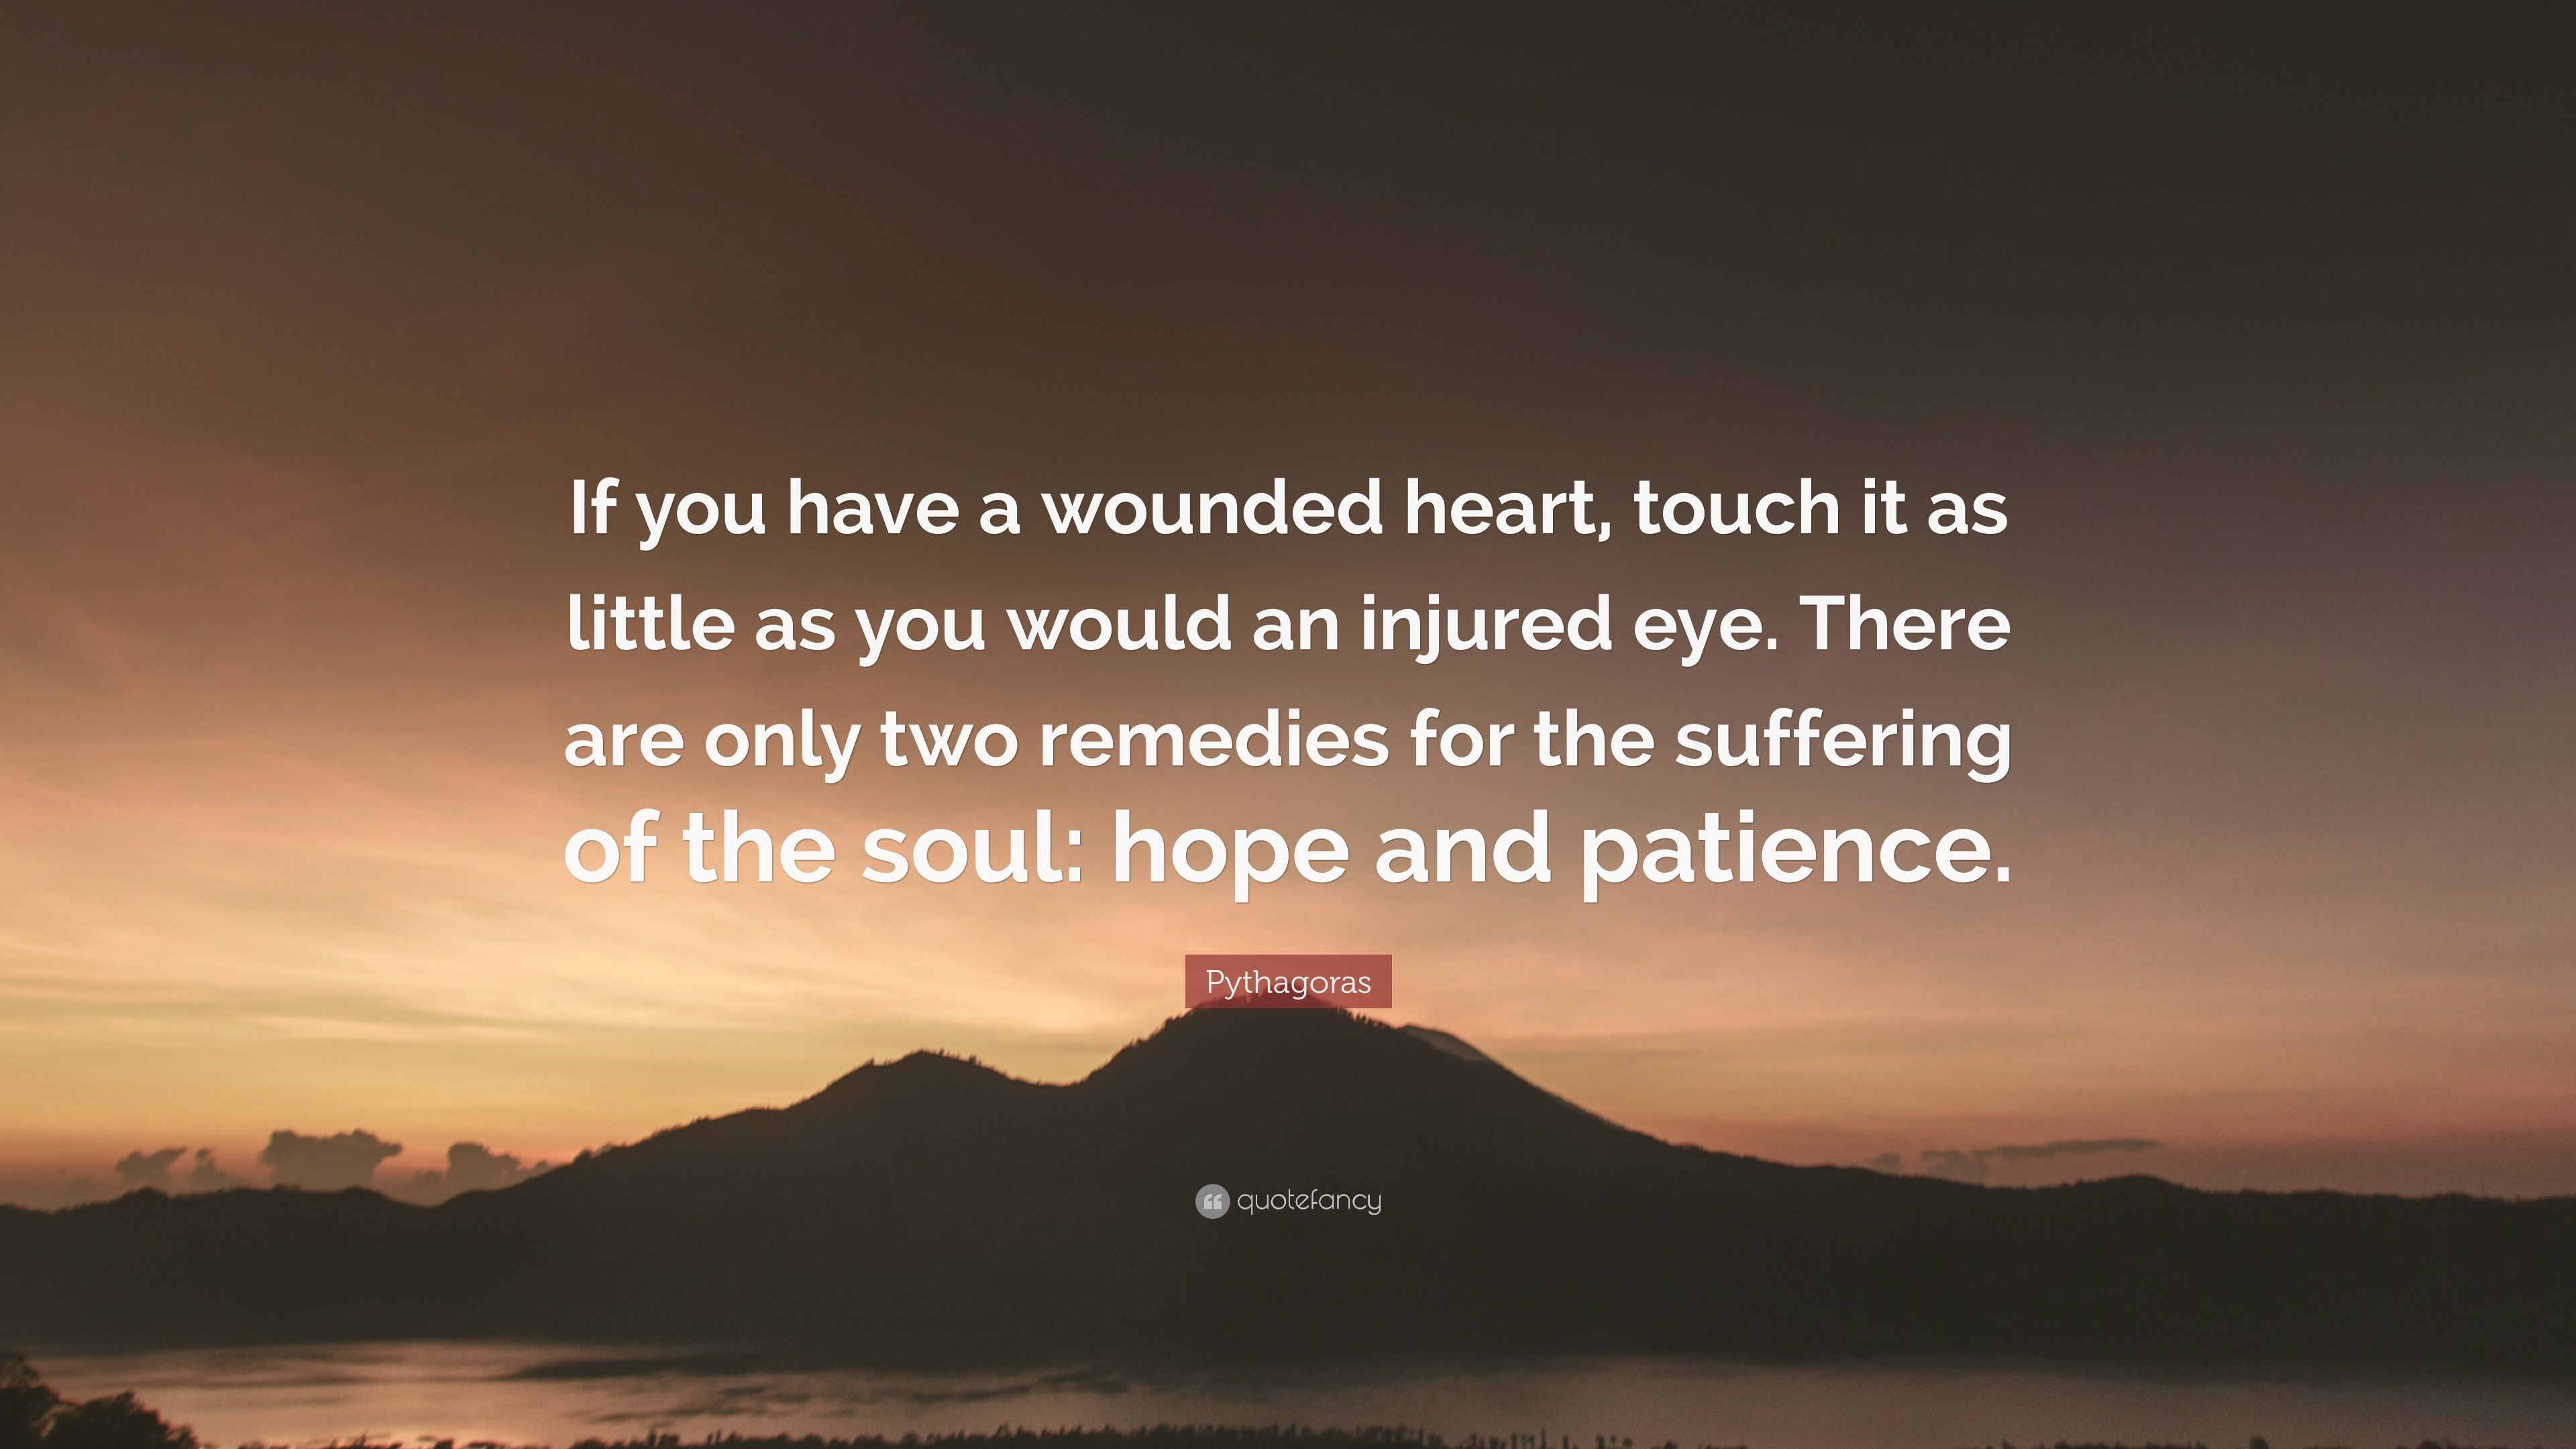 3840x2160 Pythagoras Quote: “If you have a wounded heart, touch it as little as